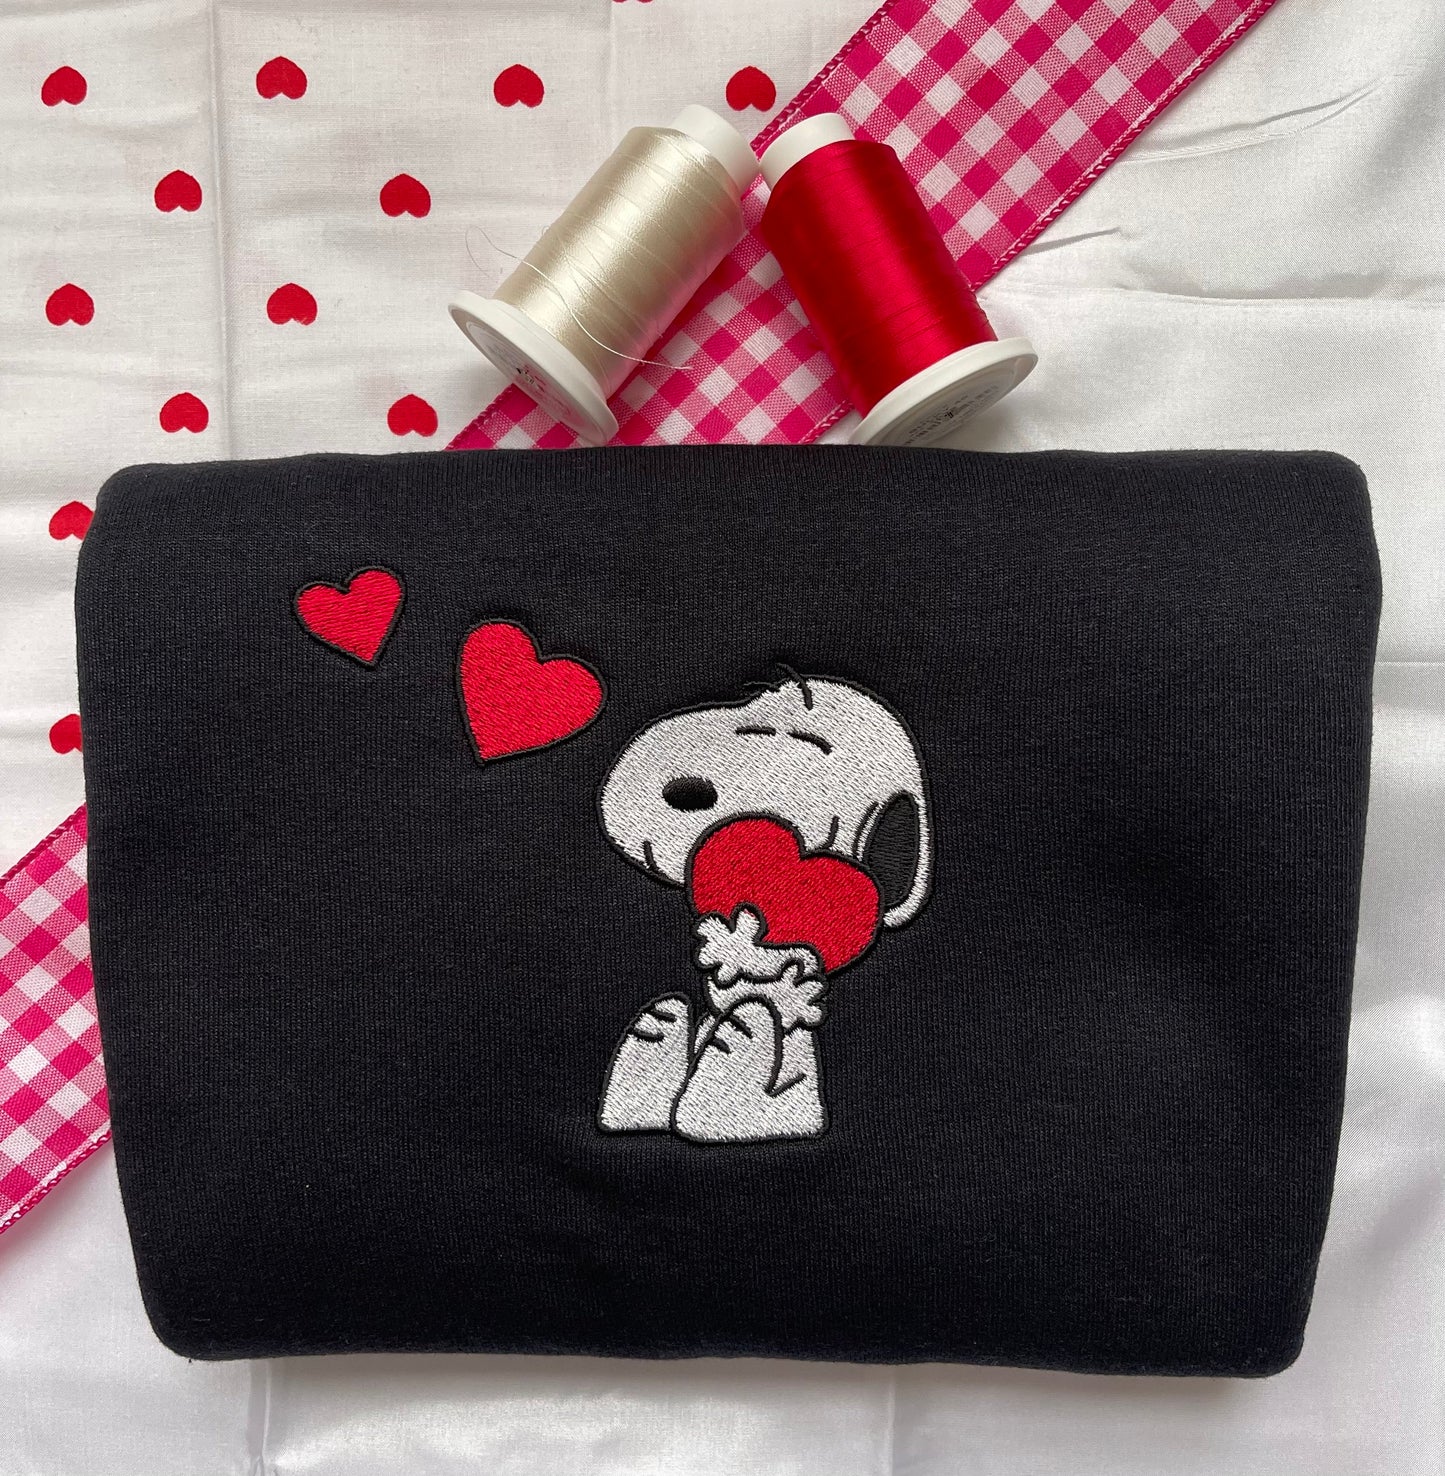 "Snoopy Hearts" Embroidered Crewneck